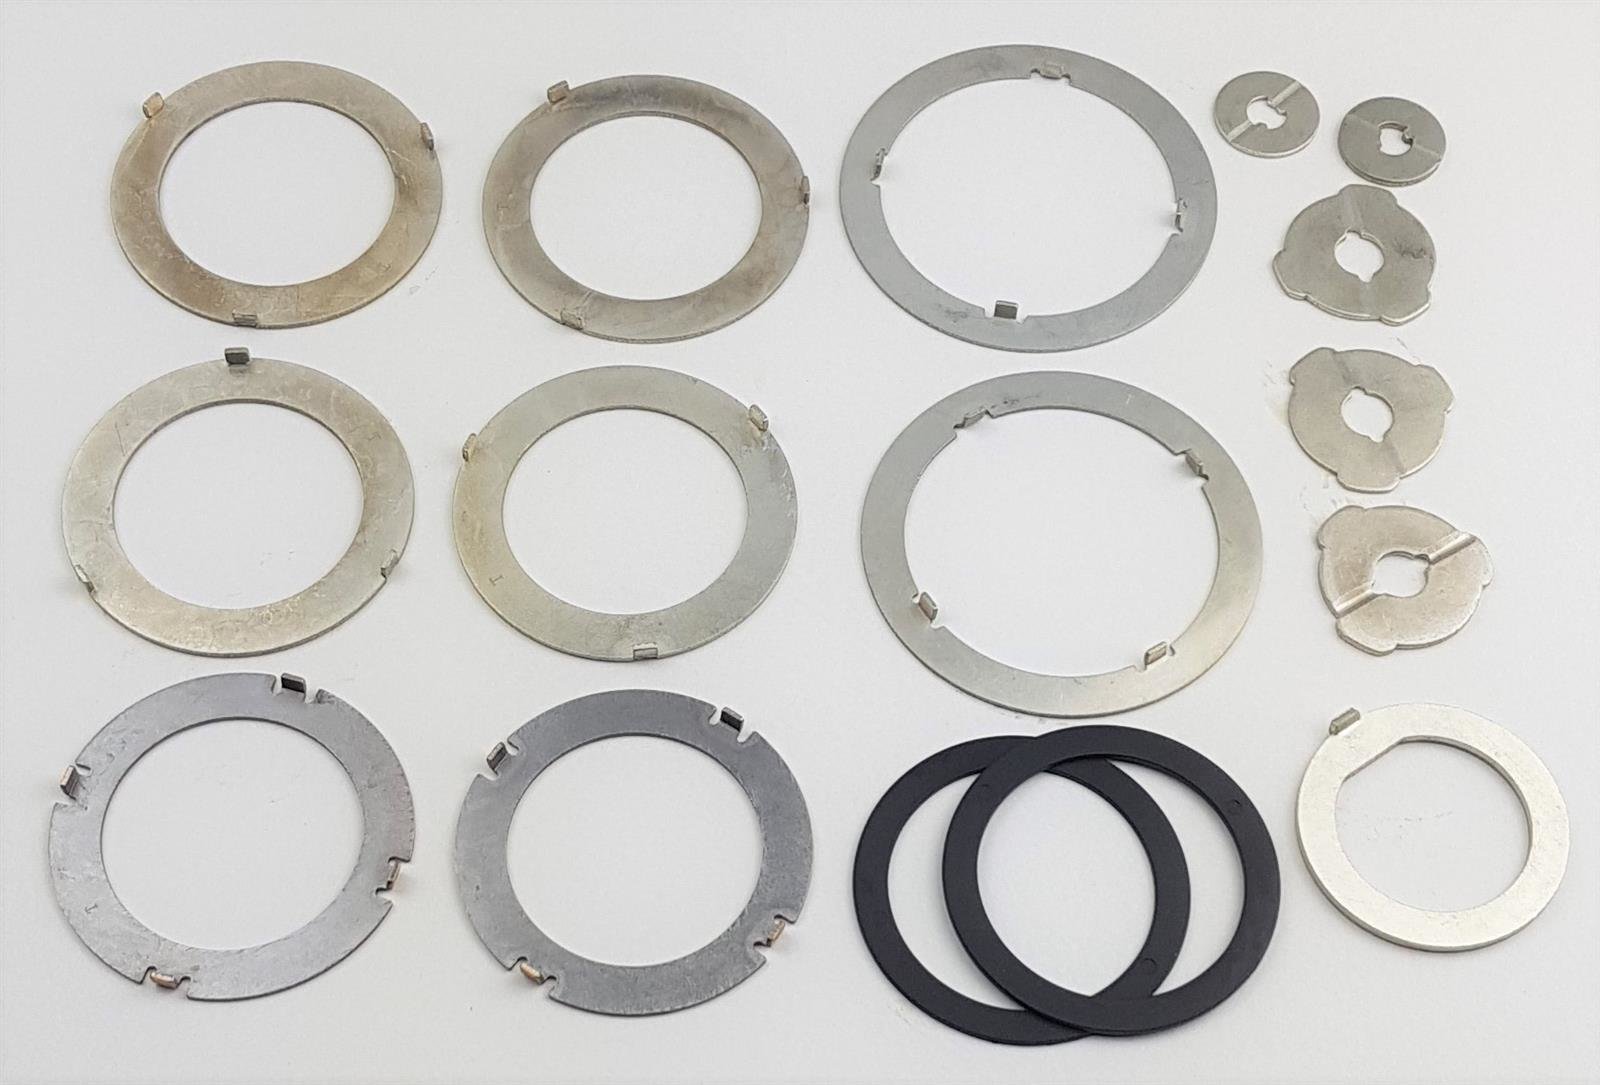 A904 TF6 Washer Kit 78-04